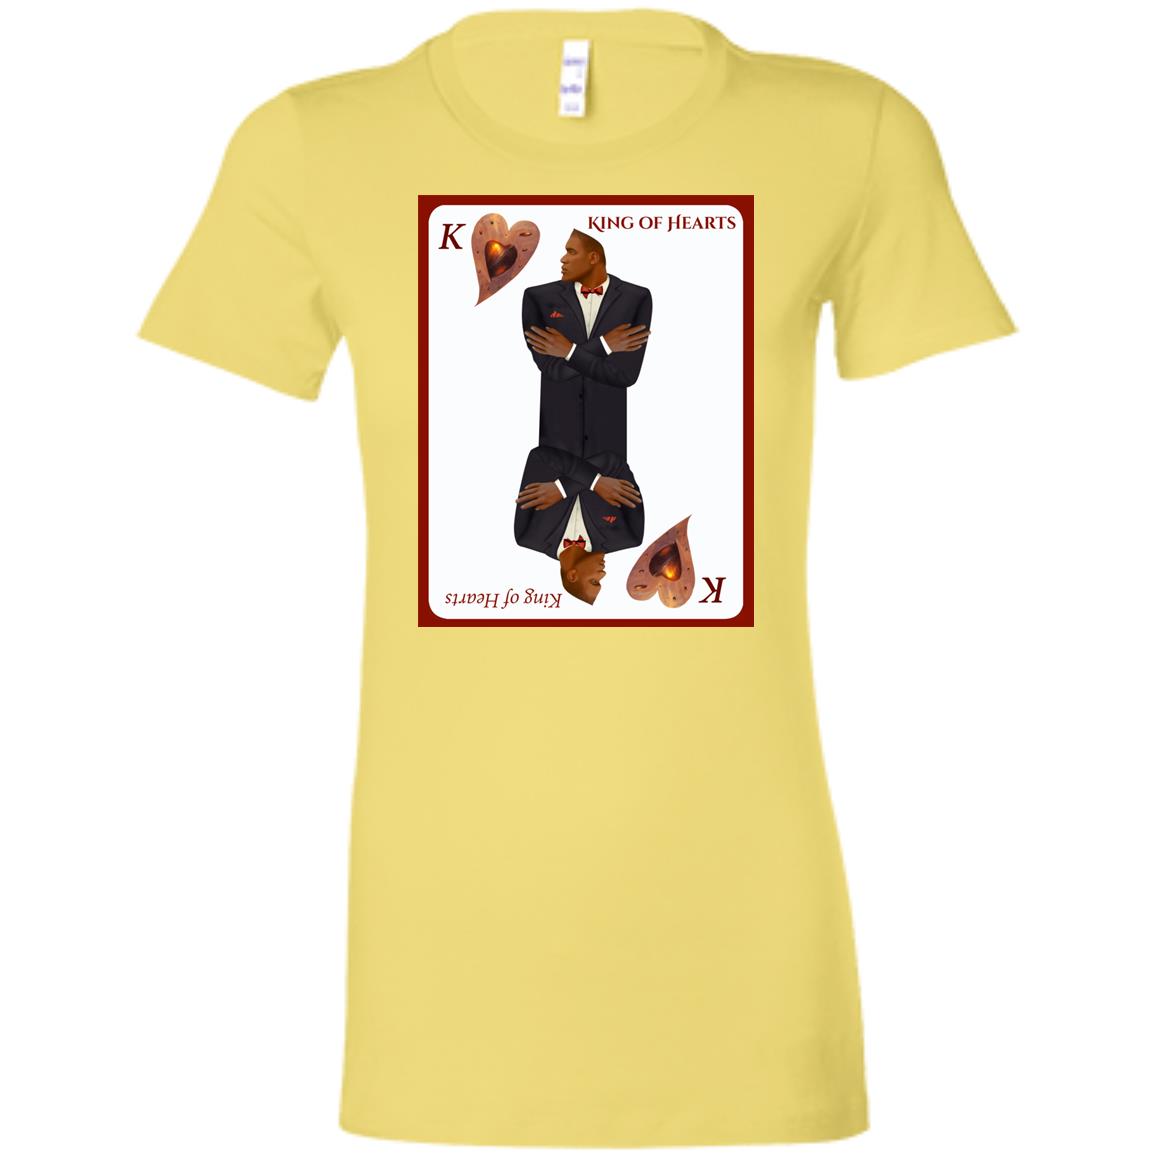 king of hearts - Women's Fitted T-Shirt